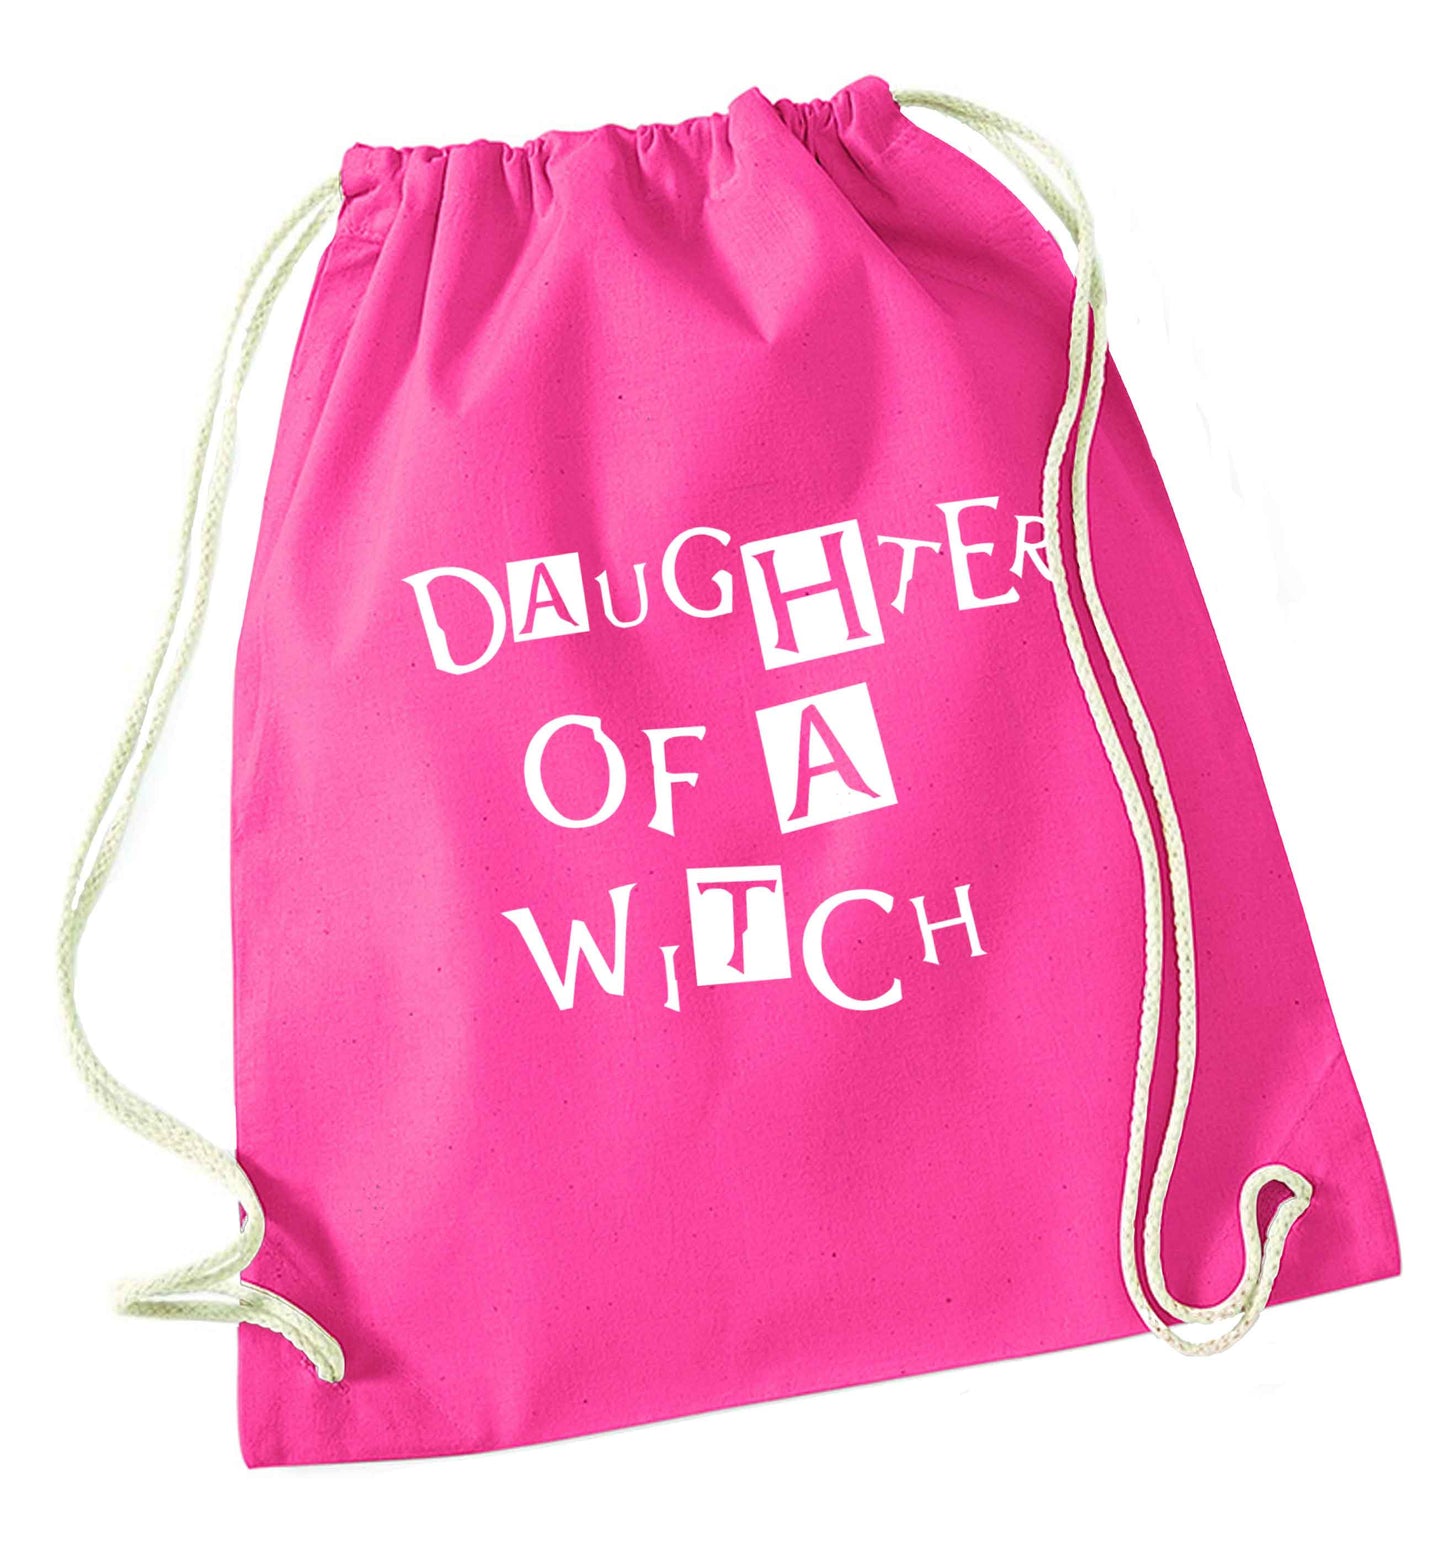 Daughter of a witch pink drawstring bag